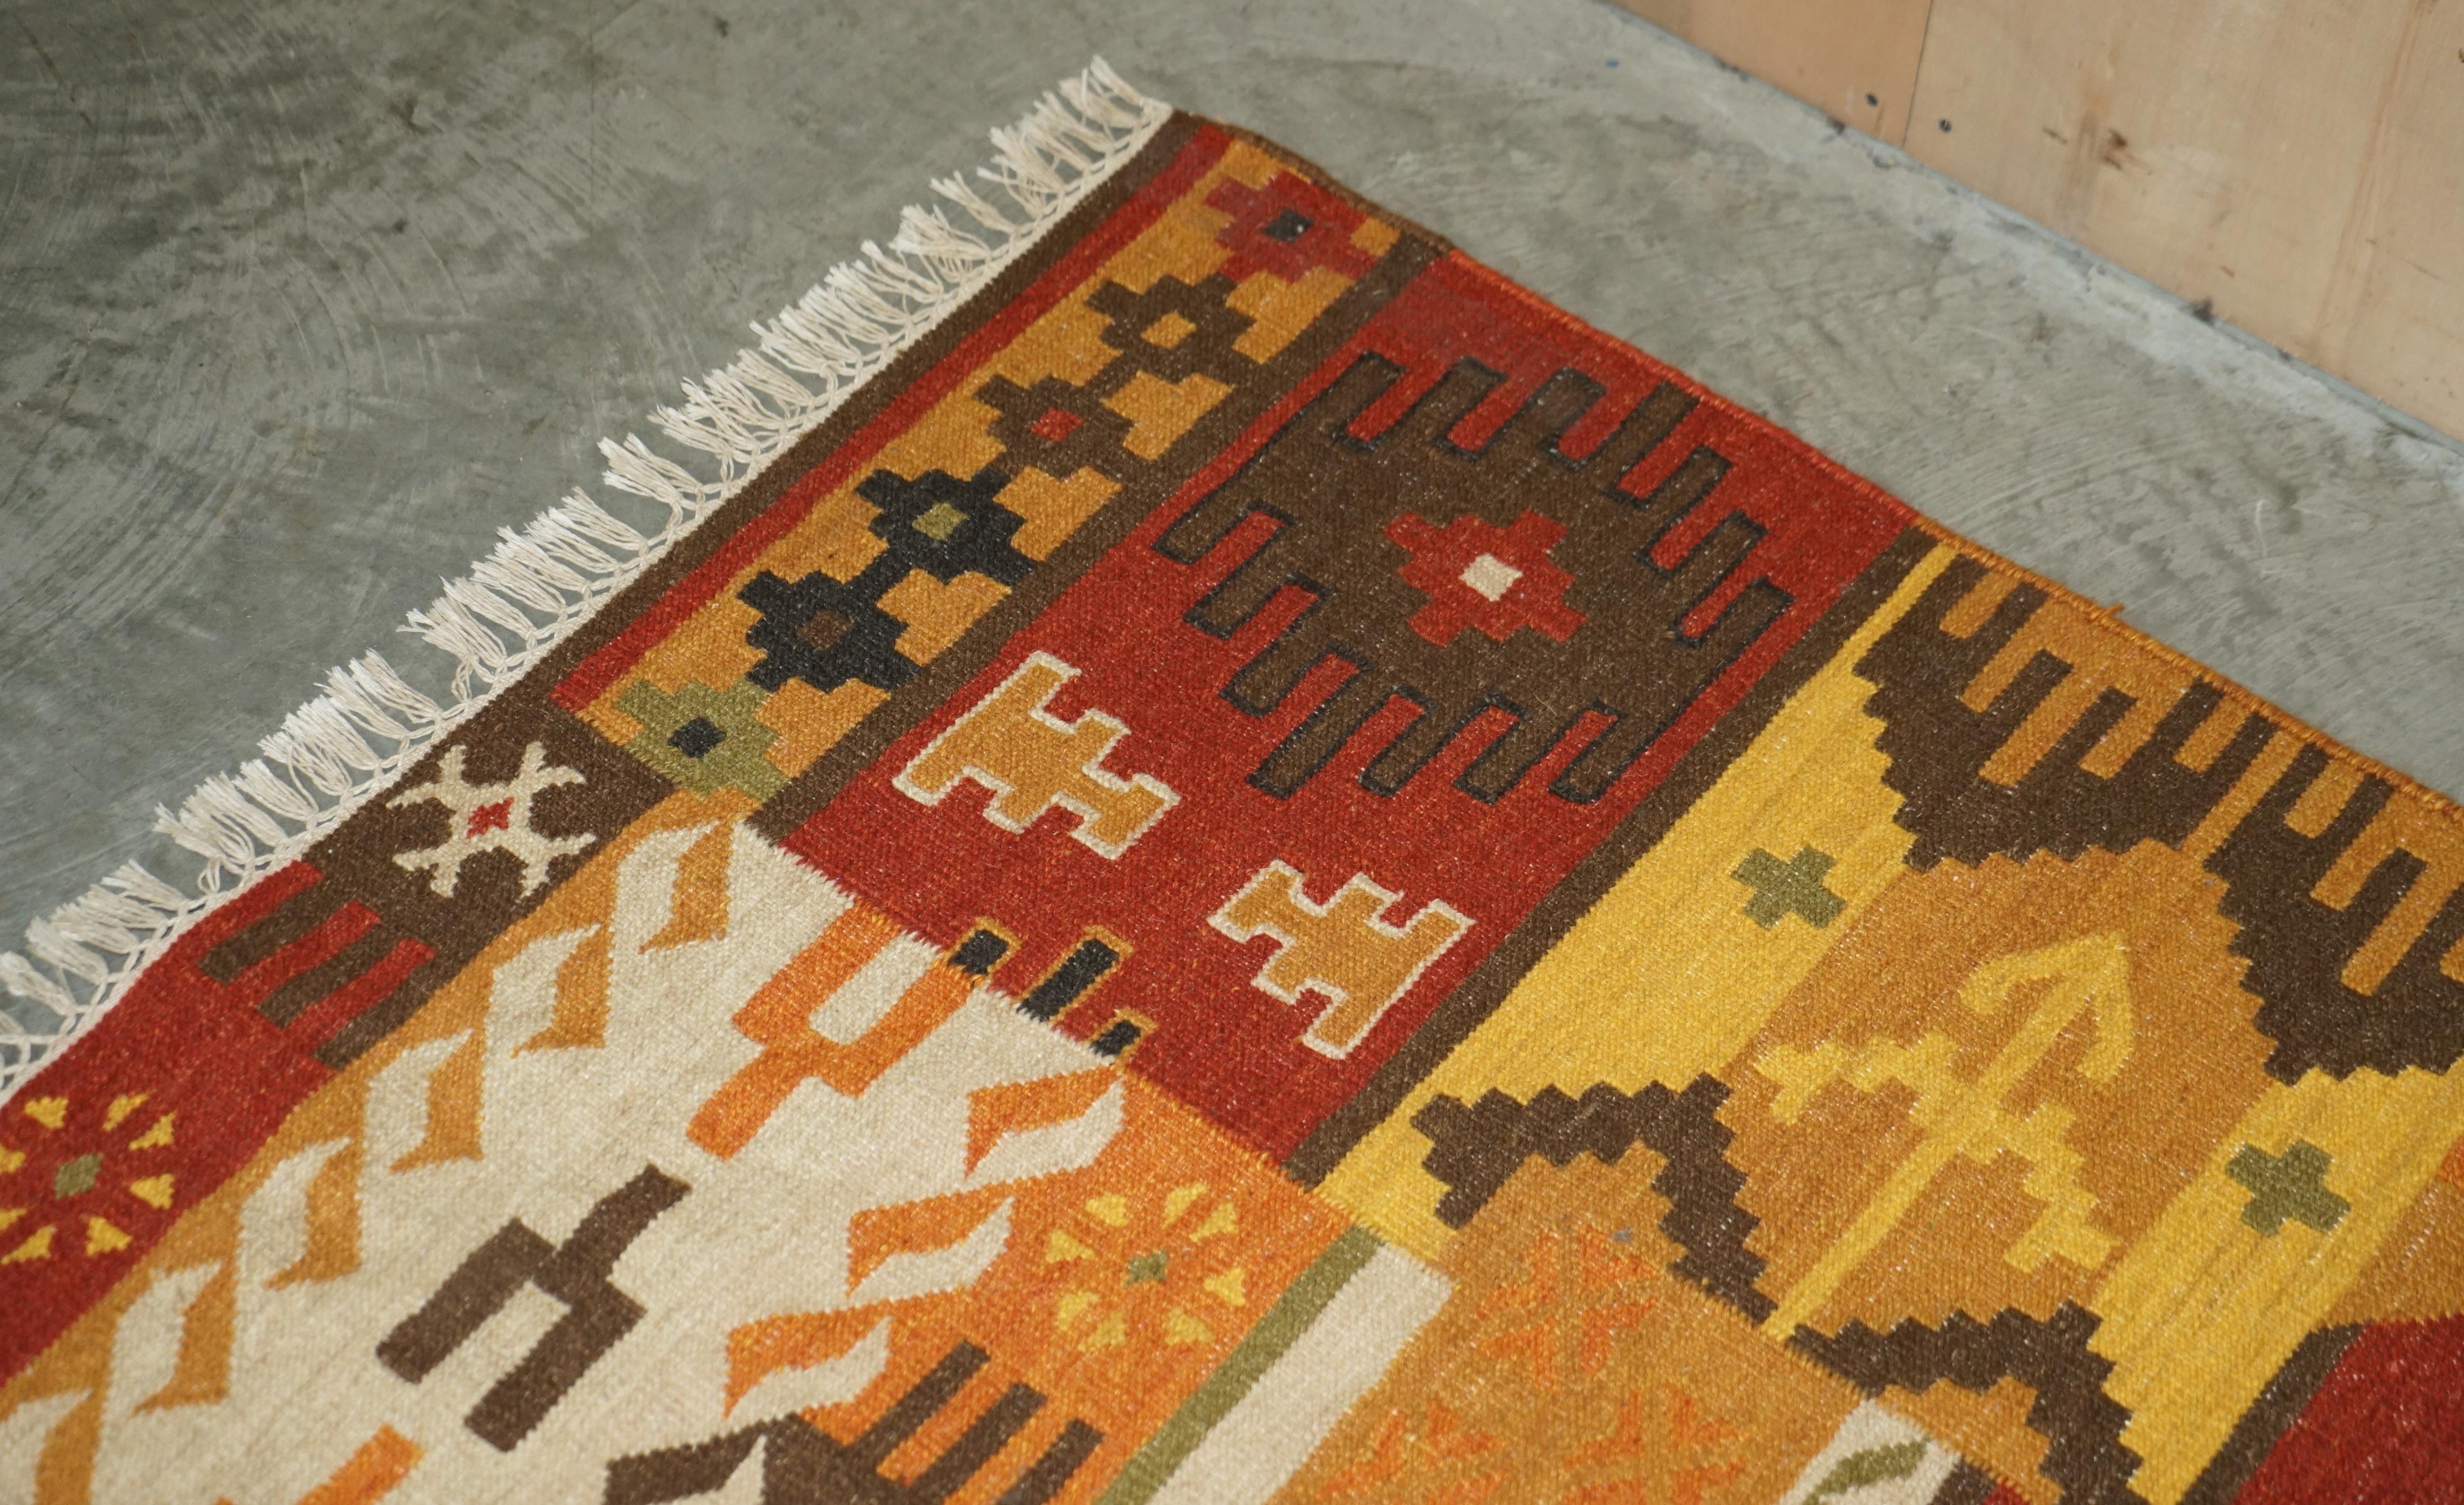 We are delighted to offer for sale this large country house, vintage Kilim rug circa 1940's.

I have a collection of 12 rugs I’m now listing for sale of all kinds of ages, periods, and sizes, some of them are really quite enormous, this sale is